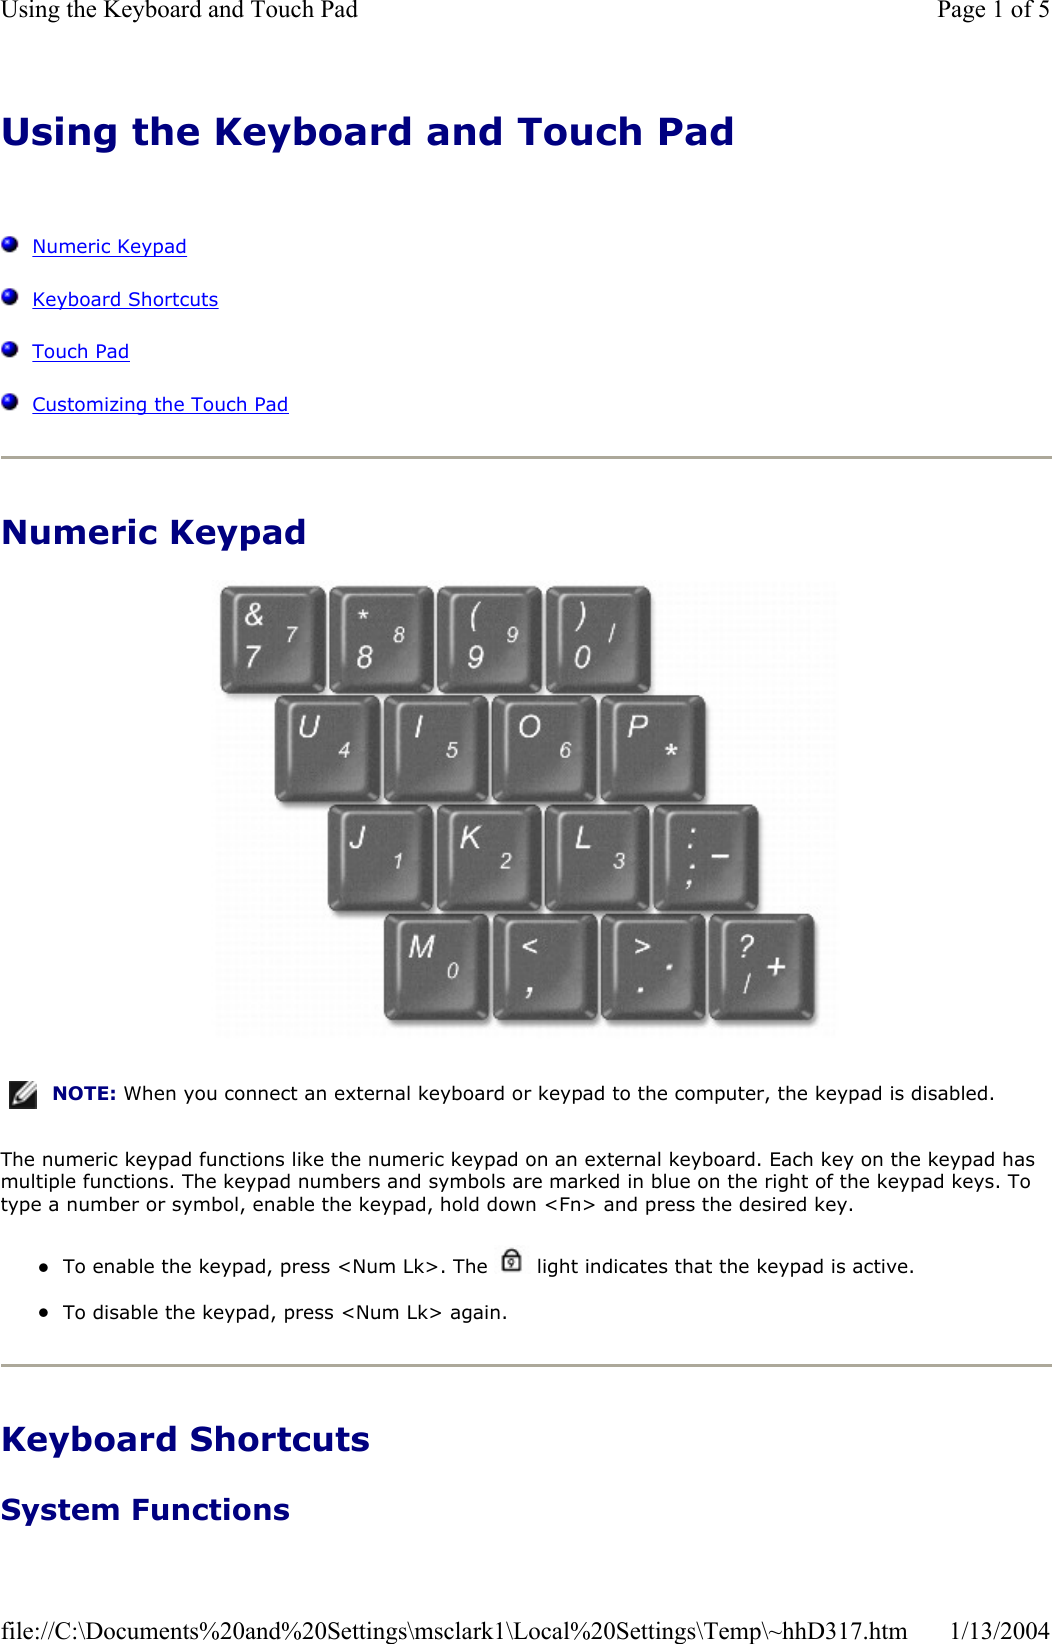 Using the Keyboard and Touch PadNumeric KeypadKeyboard ShortcutsTouch PadCustomizing the Touch PadNumeric Keypad The numeric keypad functions like the numeric keypad on an external keyboard. Each key on the keypad has multiple functions. The keypad numbers and symbols are marked in blue on the right of the keypad keys. To type a number or symbol, enable the keypad, hold down &lt;Fn&gt; and press the desired key. zTo enable the keypad, press &lt;Num Lk&gt;. The   light indicates that the keypad is active. zTo disable the keypad, press &lt;Num Lk&gt; again. Keyboard Shortcuts System Functions NOTE: When you connect an external keyboard or keypad to the computer, the keypad is disabled.Page 1 of 5Using the Keyboard and Touch Pad1/13/2004file://C:\Documents%20and%20Settings\msclark1\Local%20Settings\Temp\~hhD317.htm